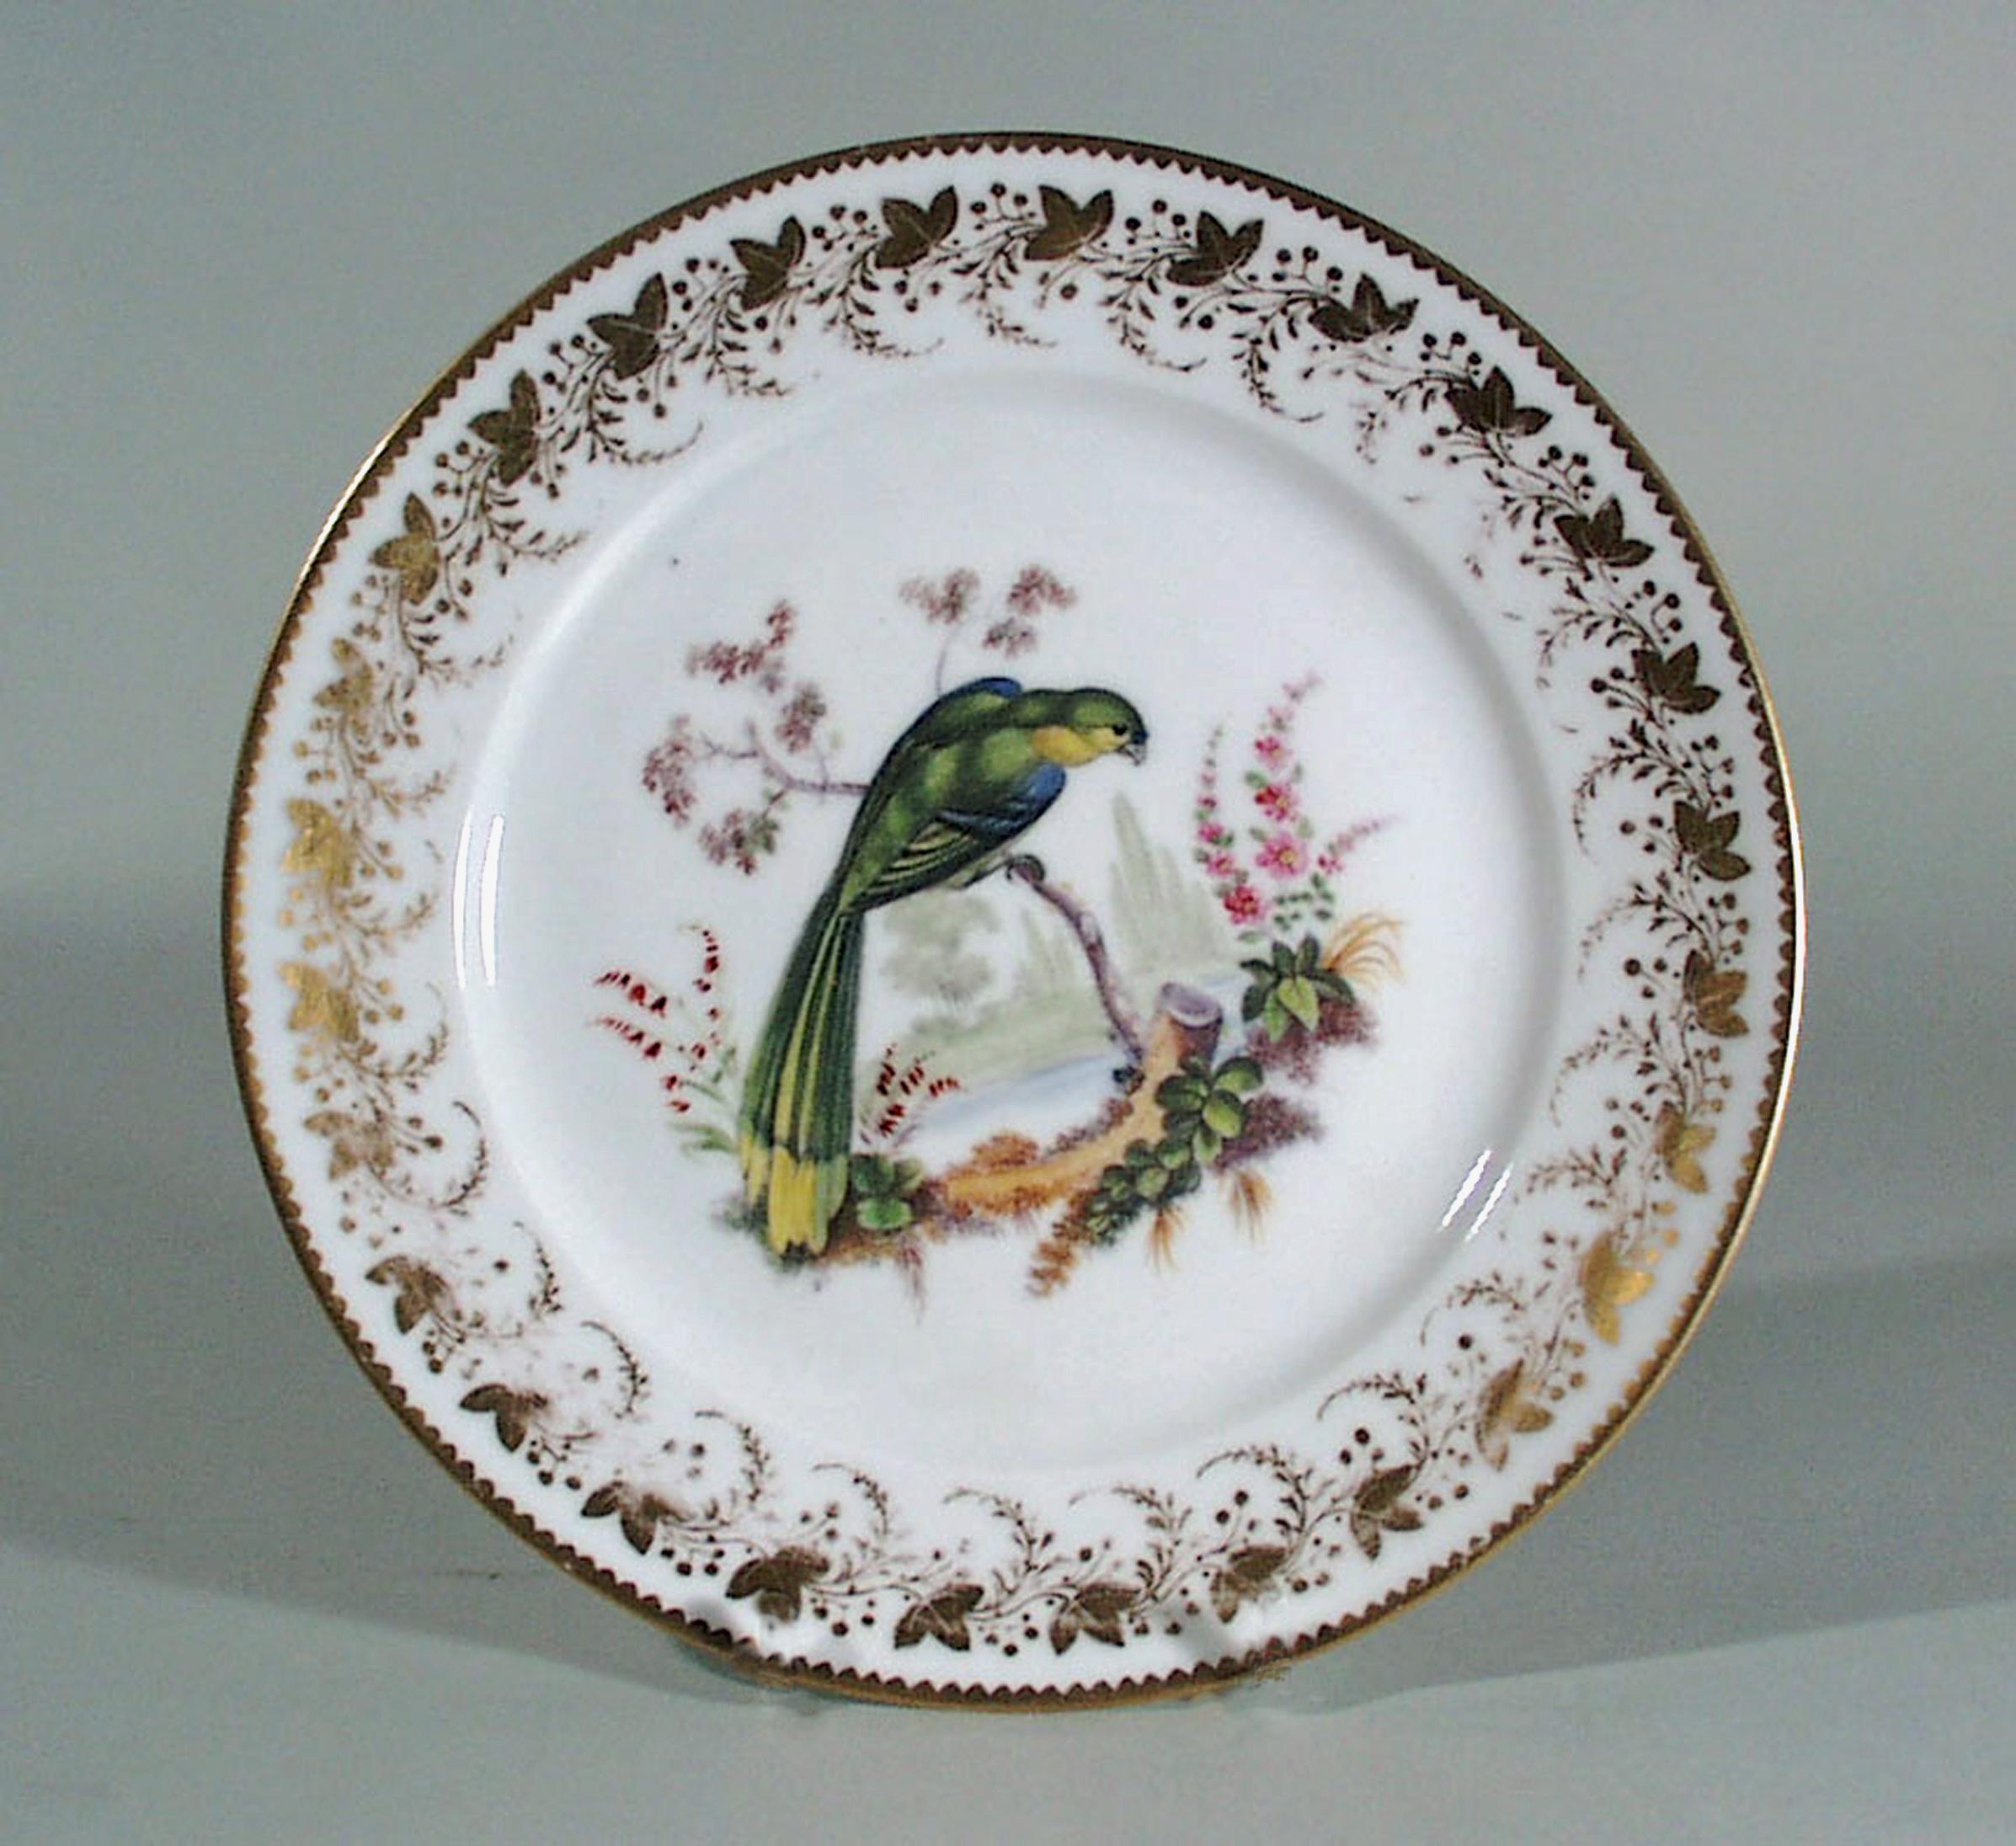 Antique London-Decorated Paris Porcelain Plate Probably by Thomas Randall 1